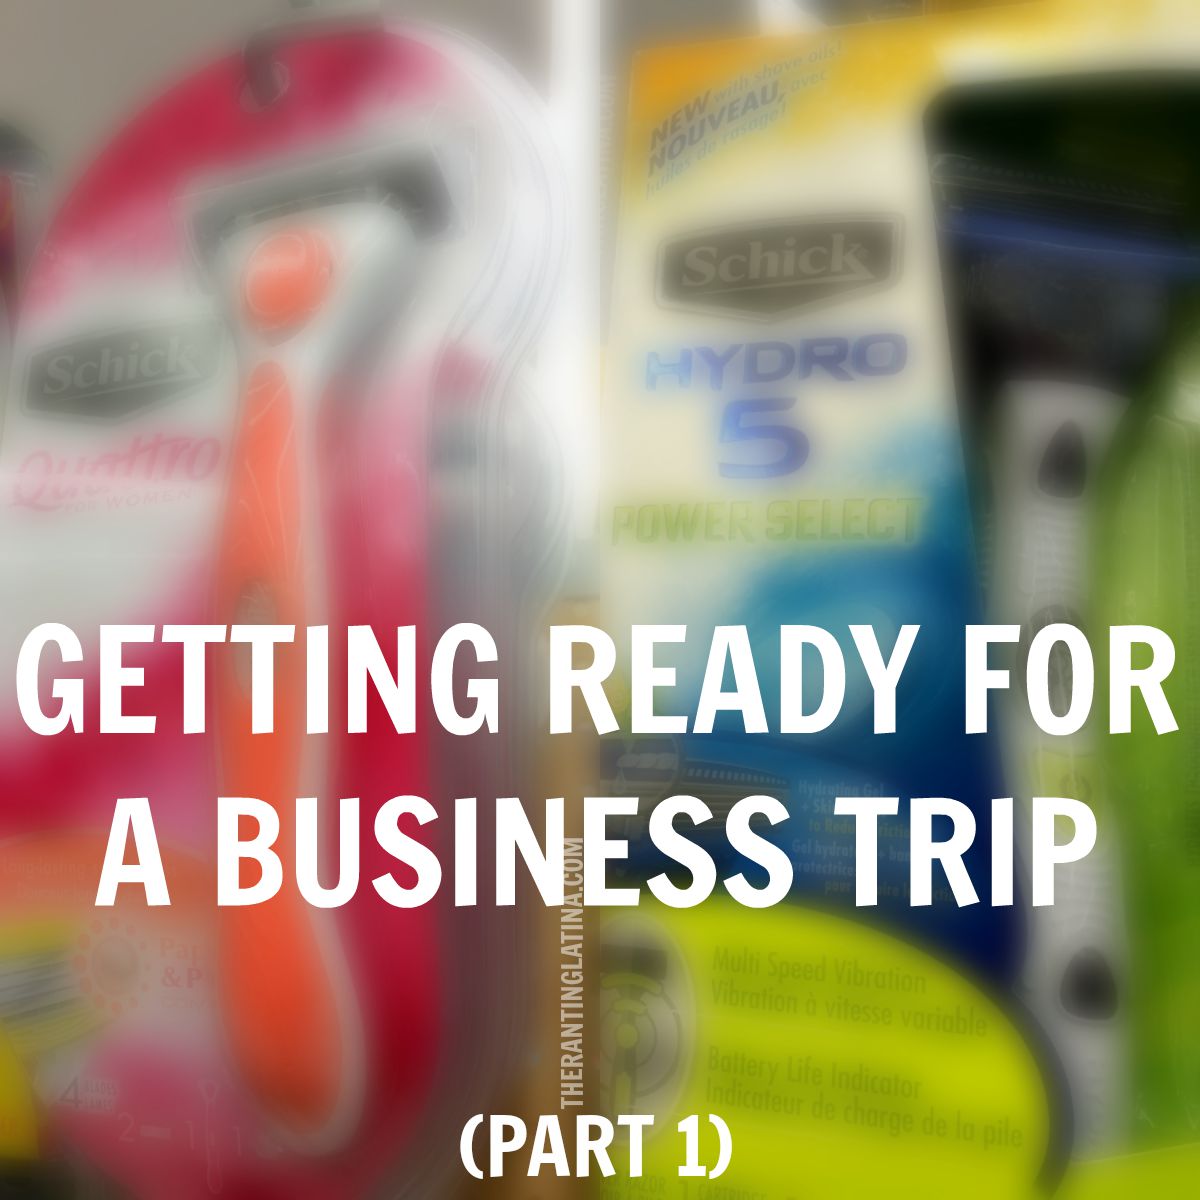 How To Prep for A Business Trip (Part 1)